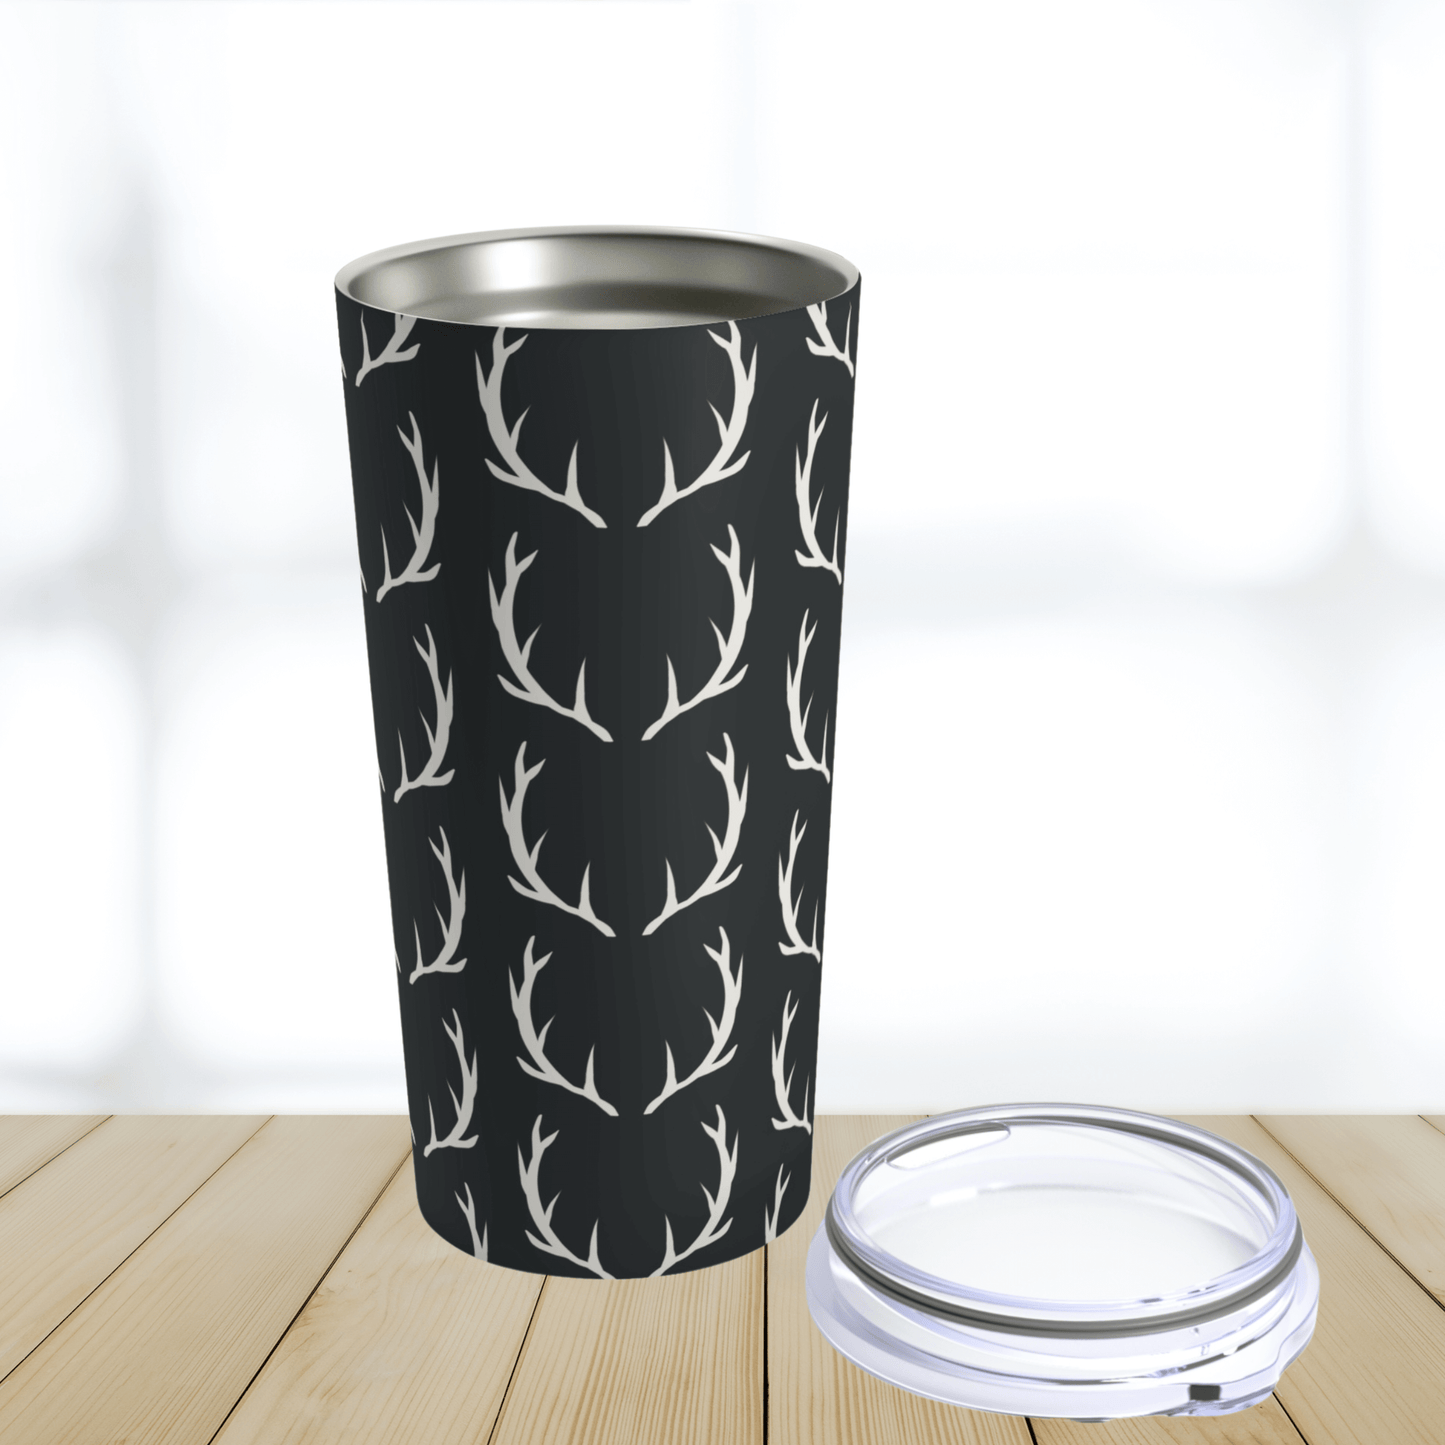 Our mens deer antler tumbler is dishwasher safe to last for daily use in case he forgets to hand wash it. The durable rust resistant and stainless steel construction keeps beverages hot or cold for hours.